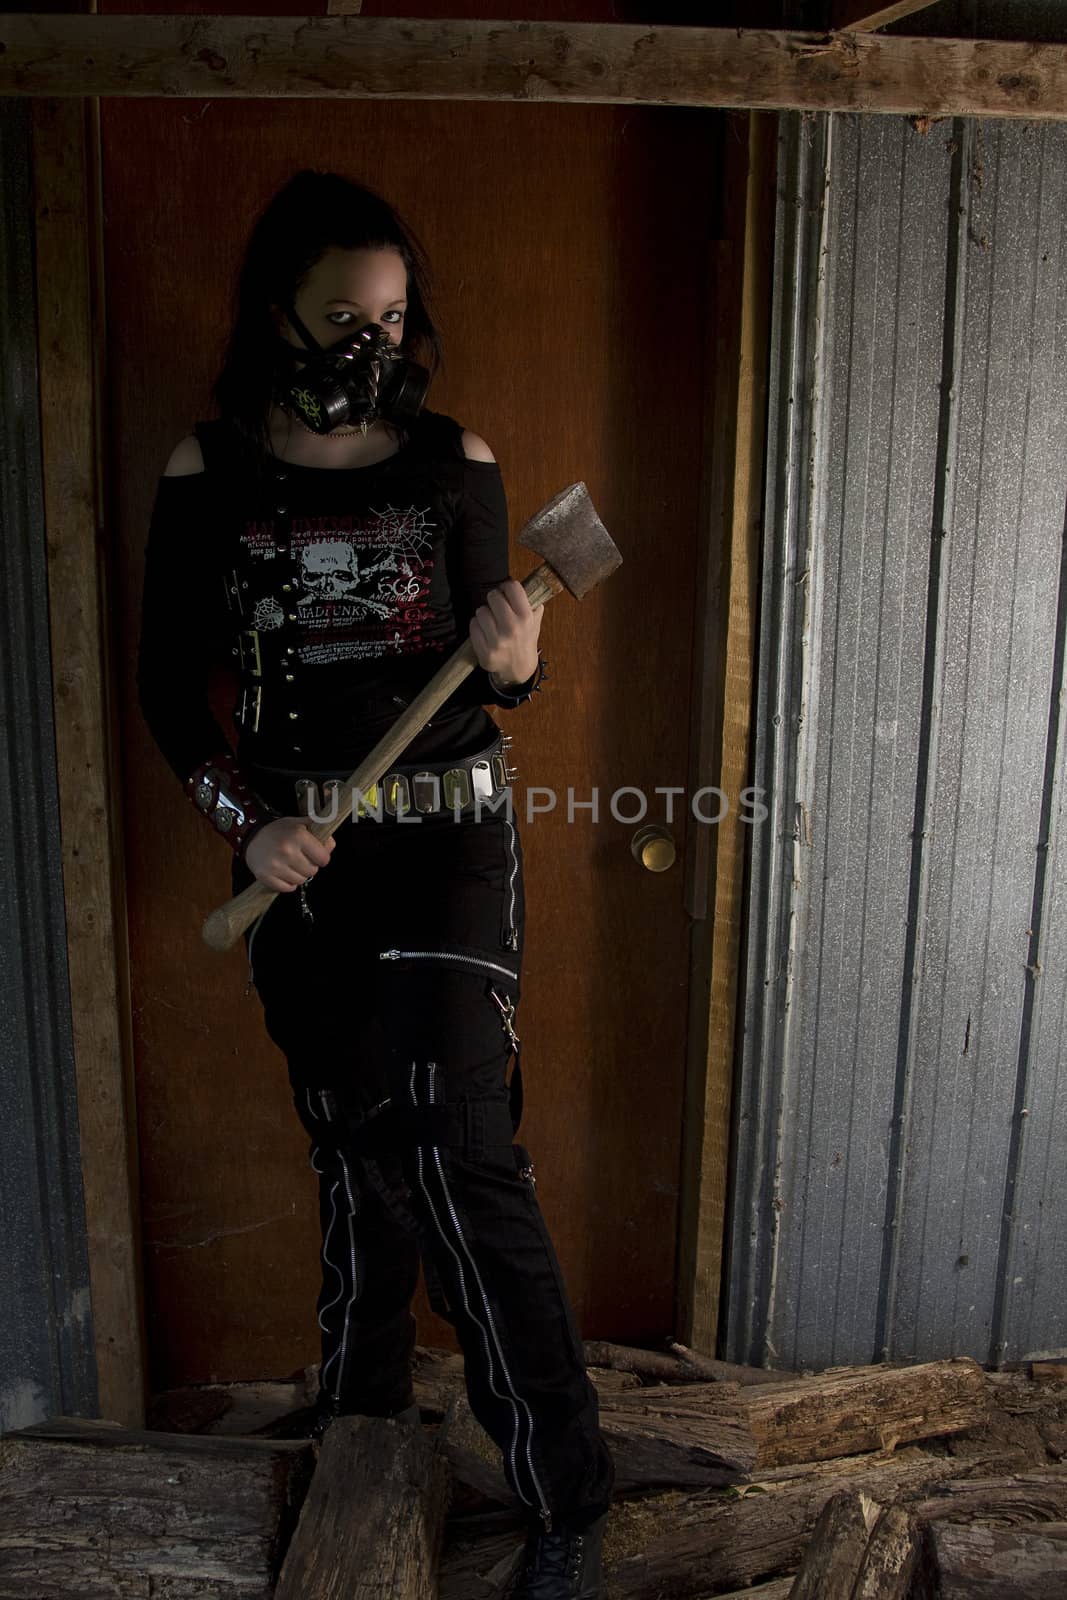 twenty something girl dress in goth fashion with a axe in front of a wooden door